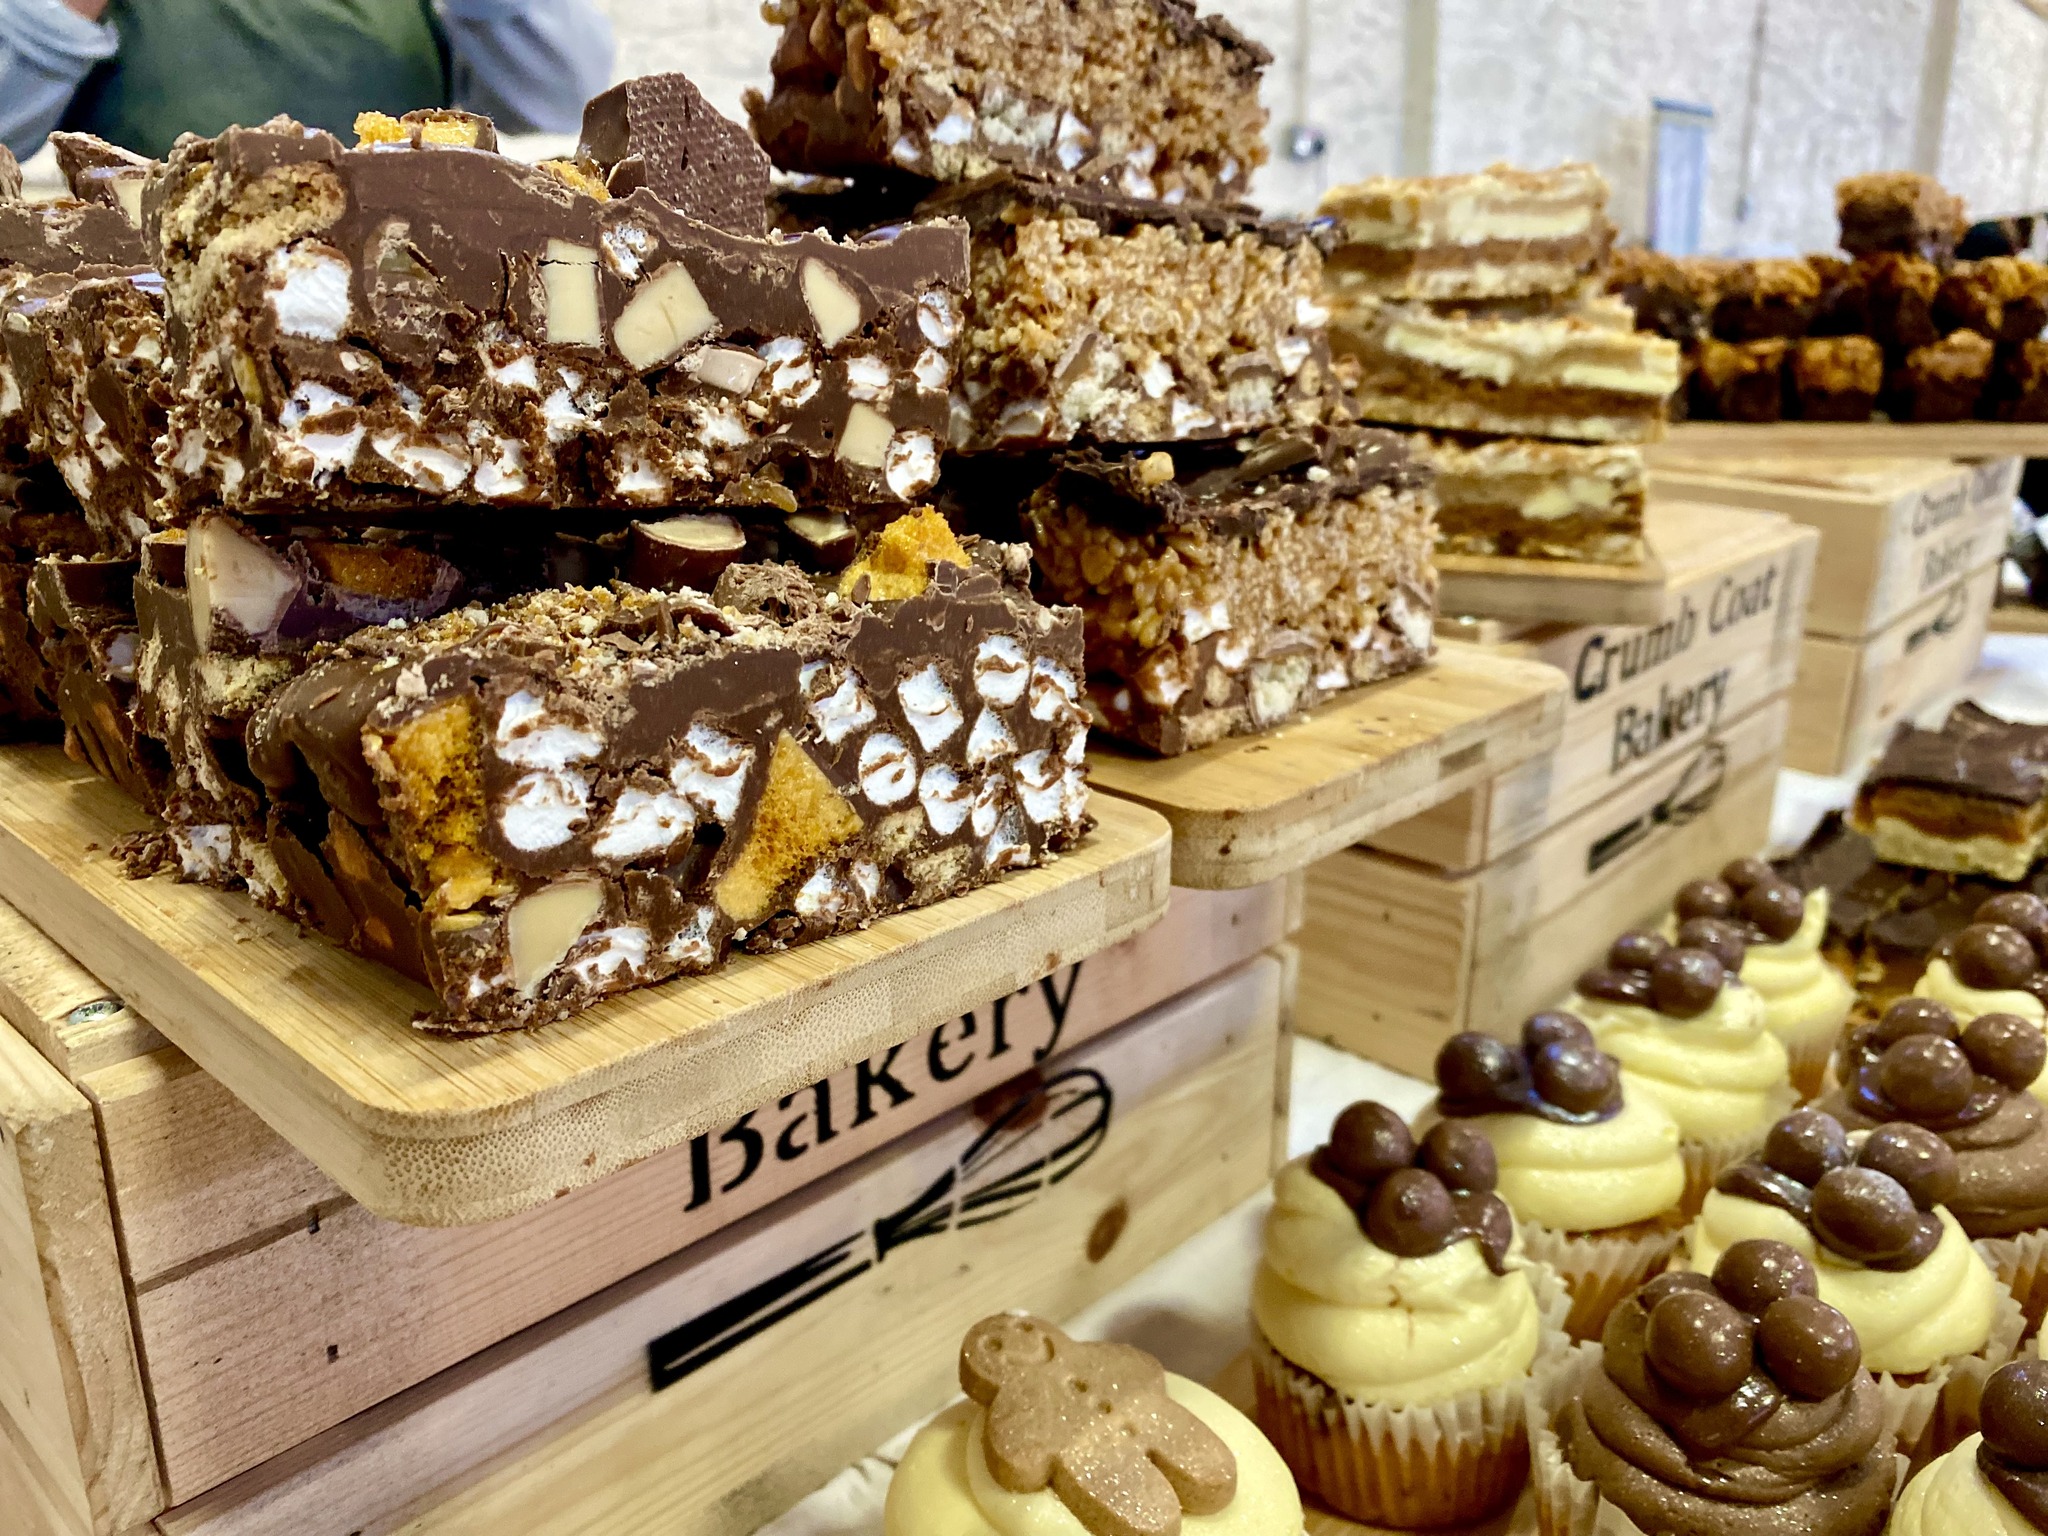 Crumbcoat Bakery Rocky Roads on display on wooden boards and boxes with cupcakes too